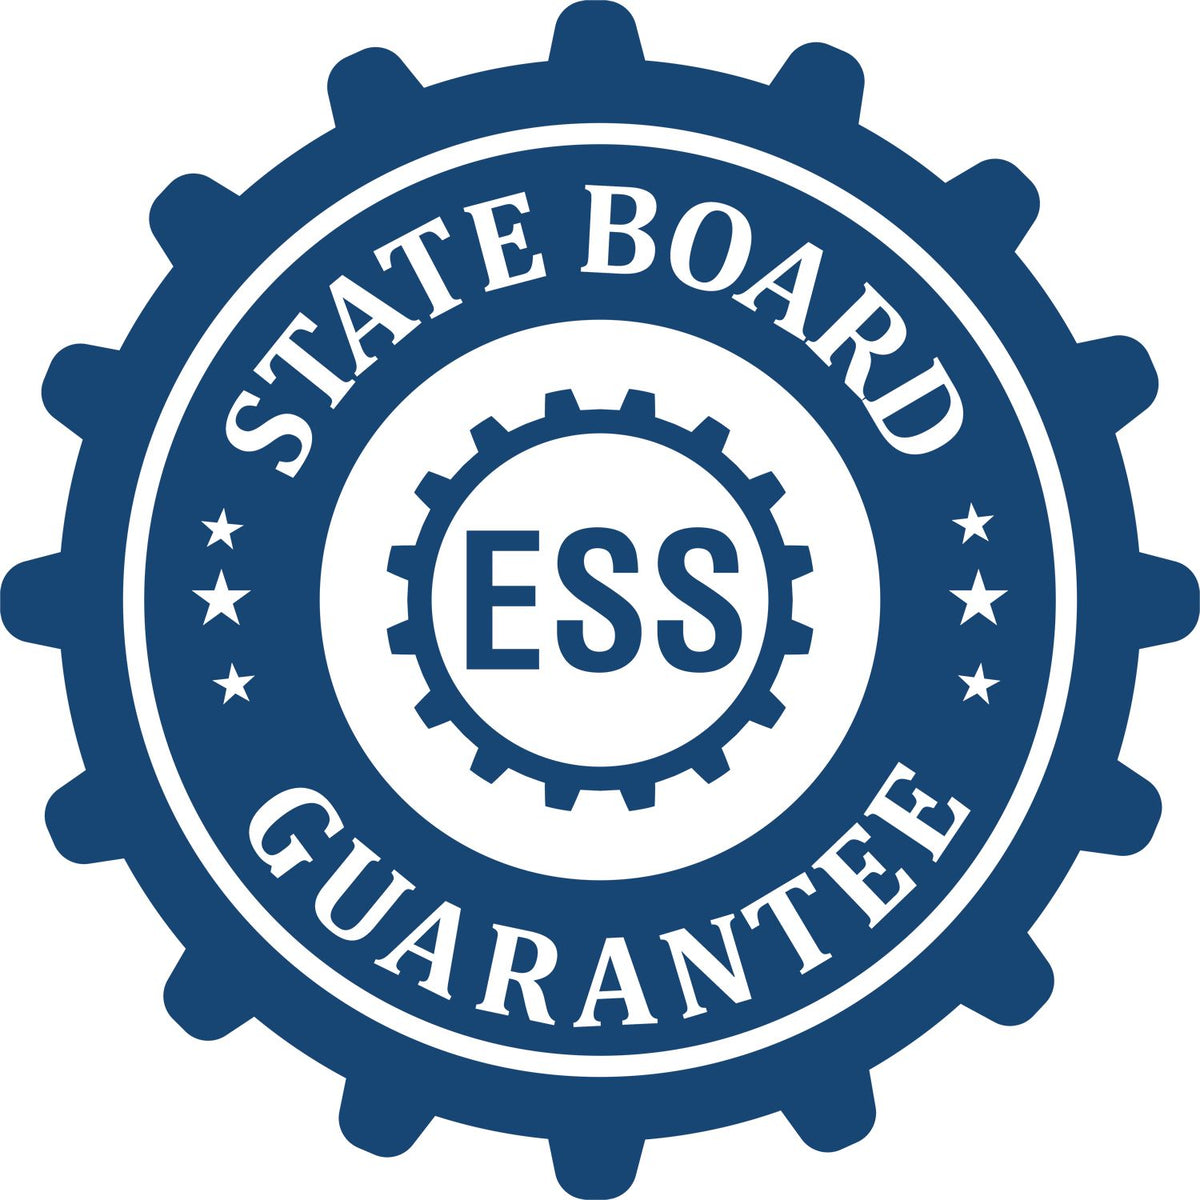 An emblem in a gear shape illustrating a state board guarantee for the State of Michigan Extended Long Reach Engineer Seal product.